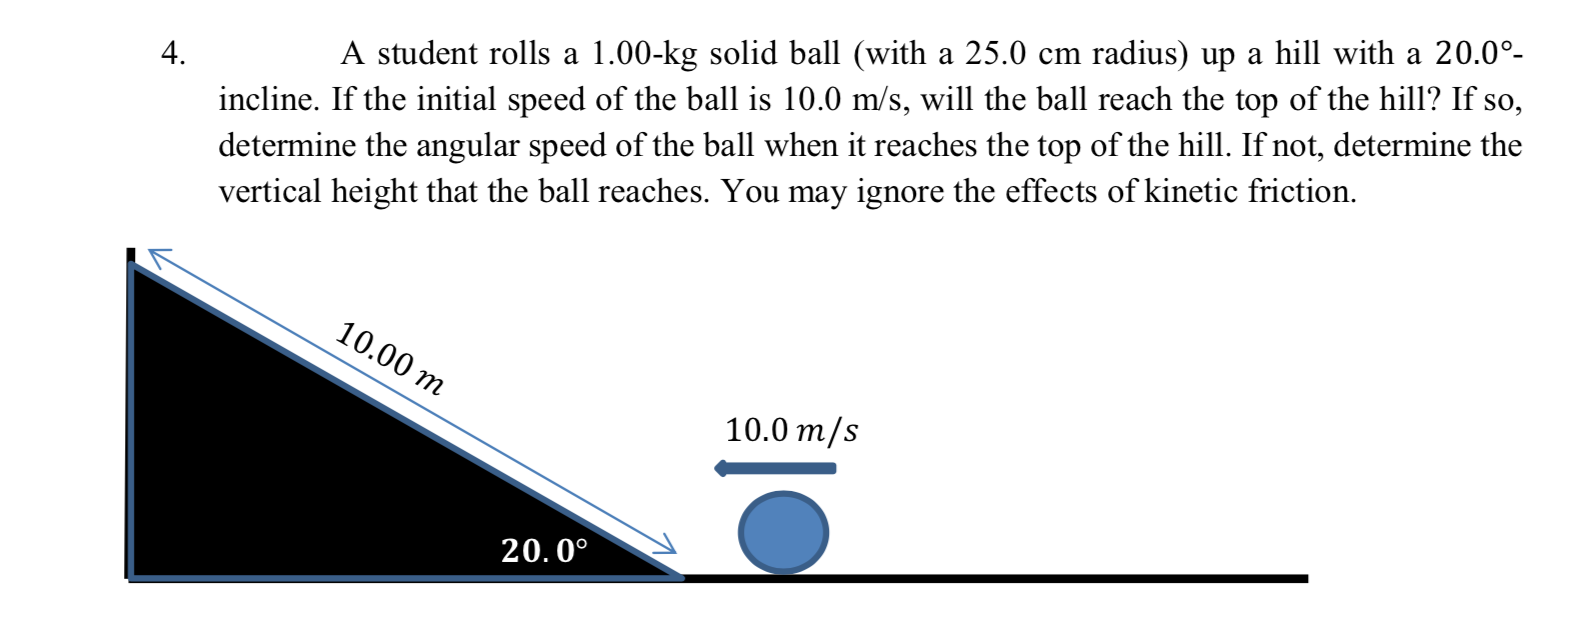 incline. If the initial speed of the ball is 10.0 m/s, will the ball reach the top of the hill? If so,
determine the angular speed of the ball when it reaches the top of the hill. If not, determine the
vertical height that the ball reaches. You may ignore the effects of kinetic friction.
4.
A student rolls a 1.00-kg solid ball (with a 25.0 cm radius) up a hill with a 20.0°-
10.00 m
10.0 m/s
20.0°
